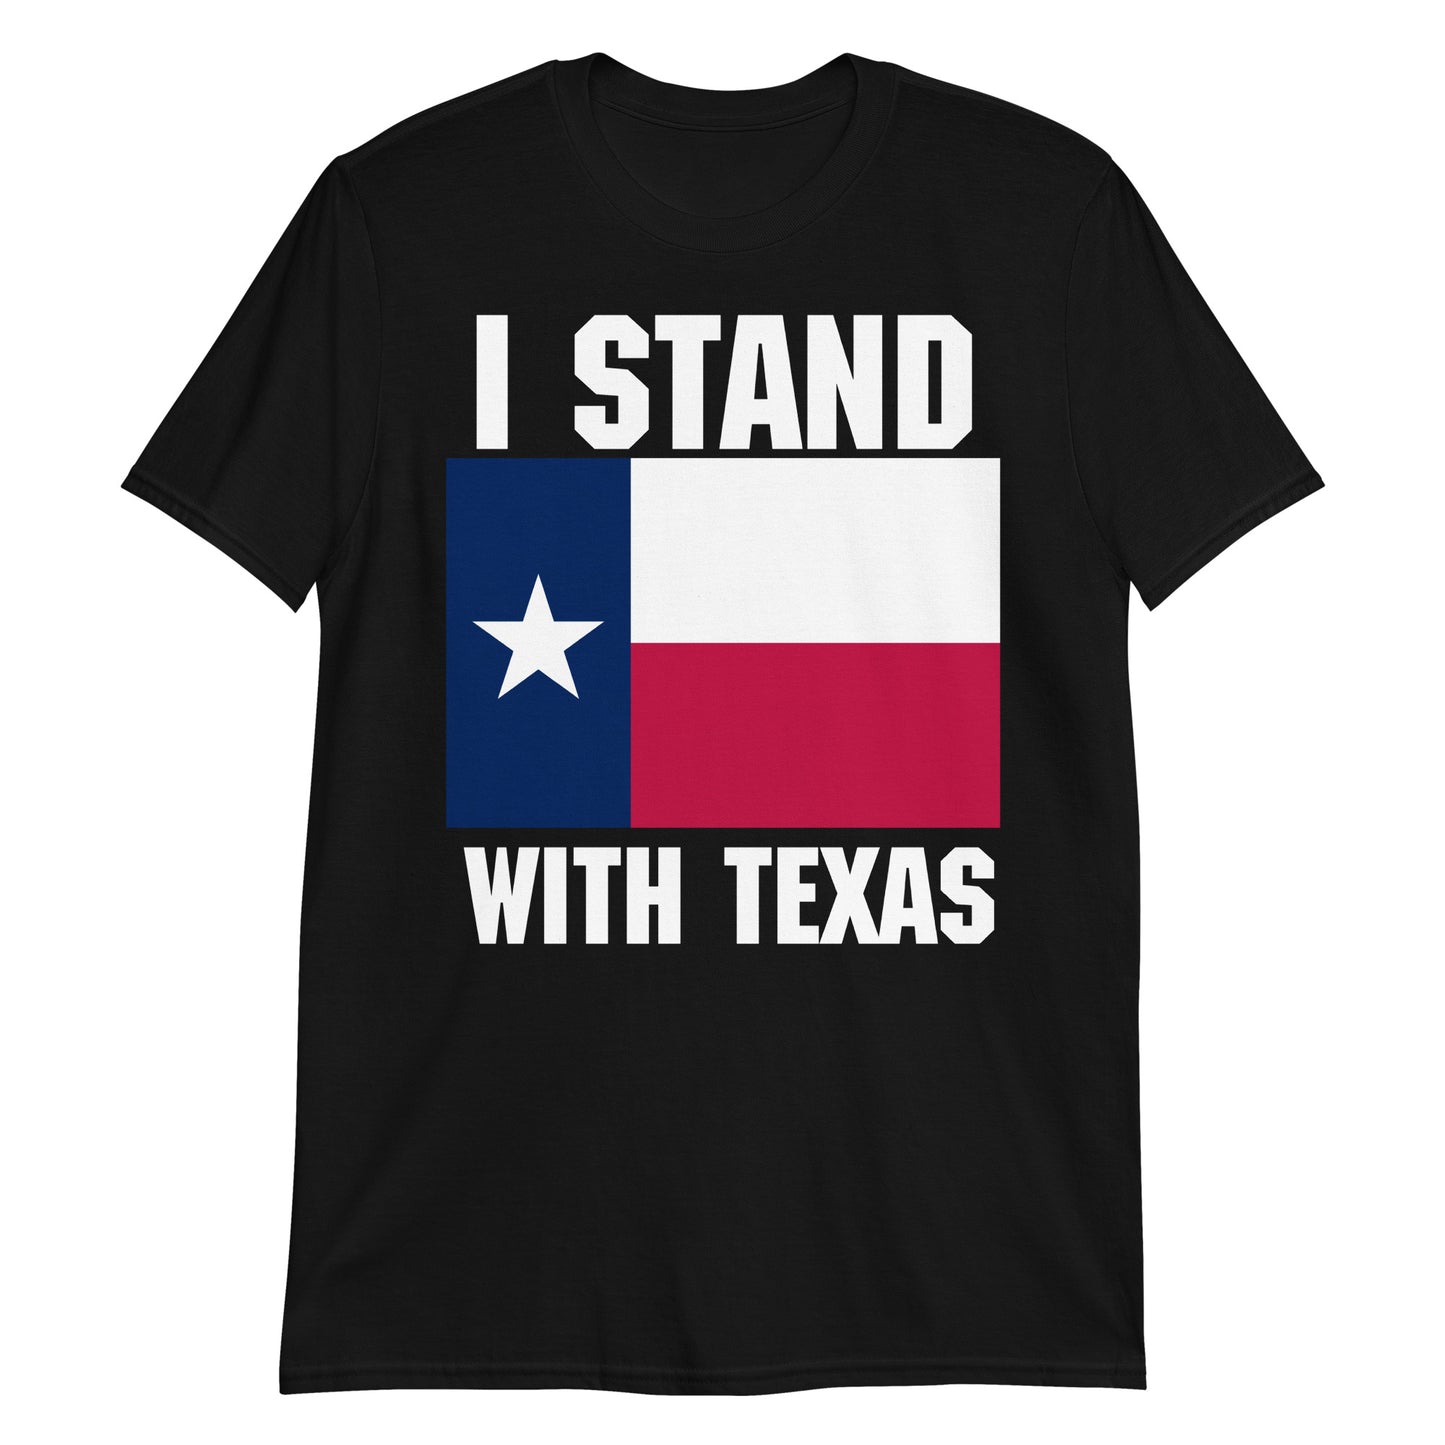 I stand with Texas High Quality Short-Sleeve Unisex T-Shirt